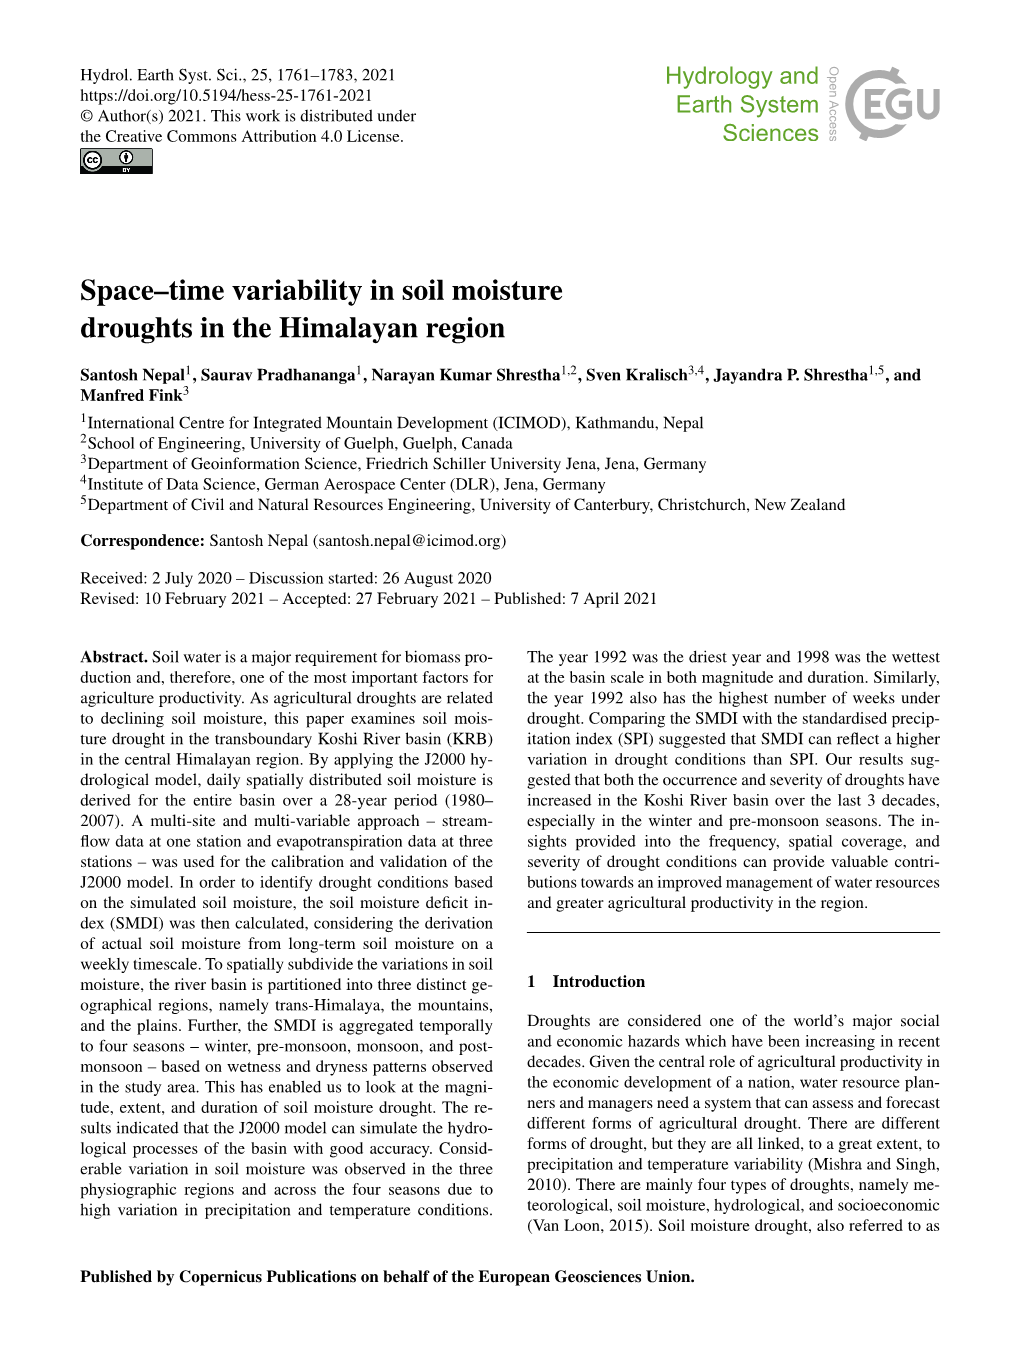 Space–Time Variability in Soil Moisture Droughts in the Himalayan Region